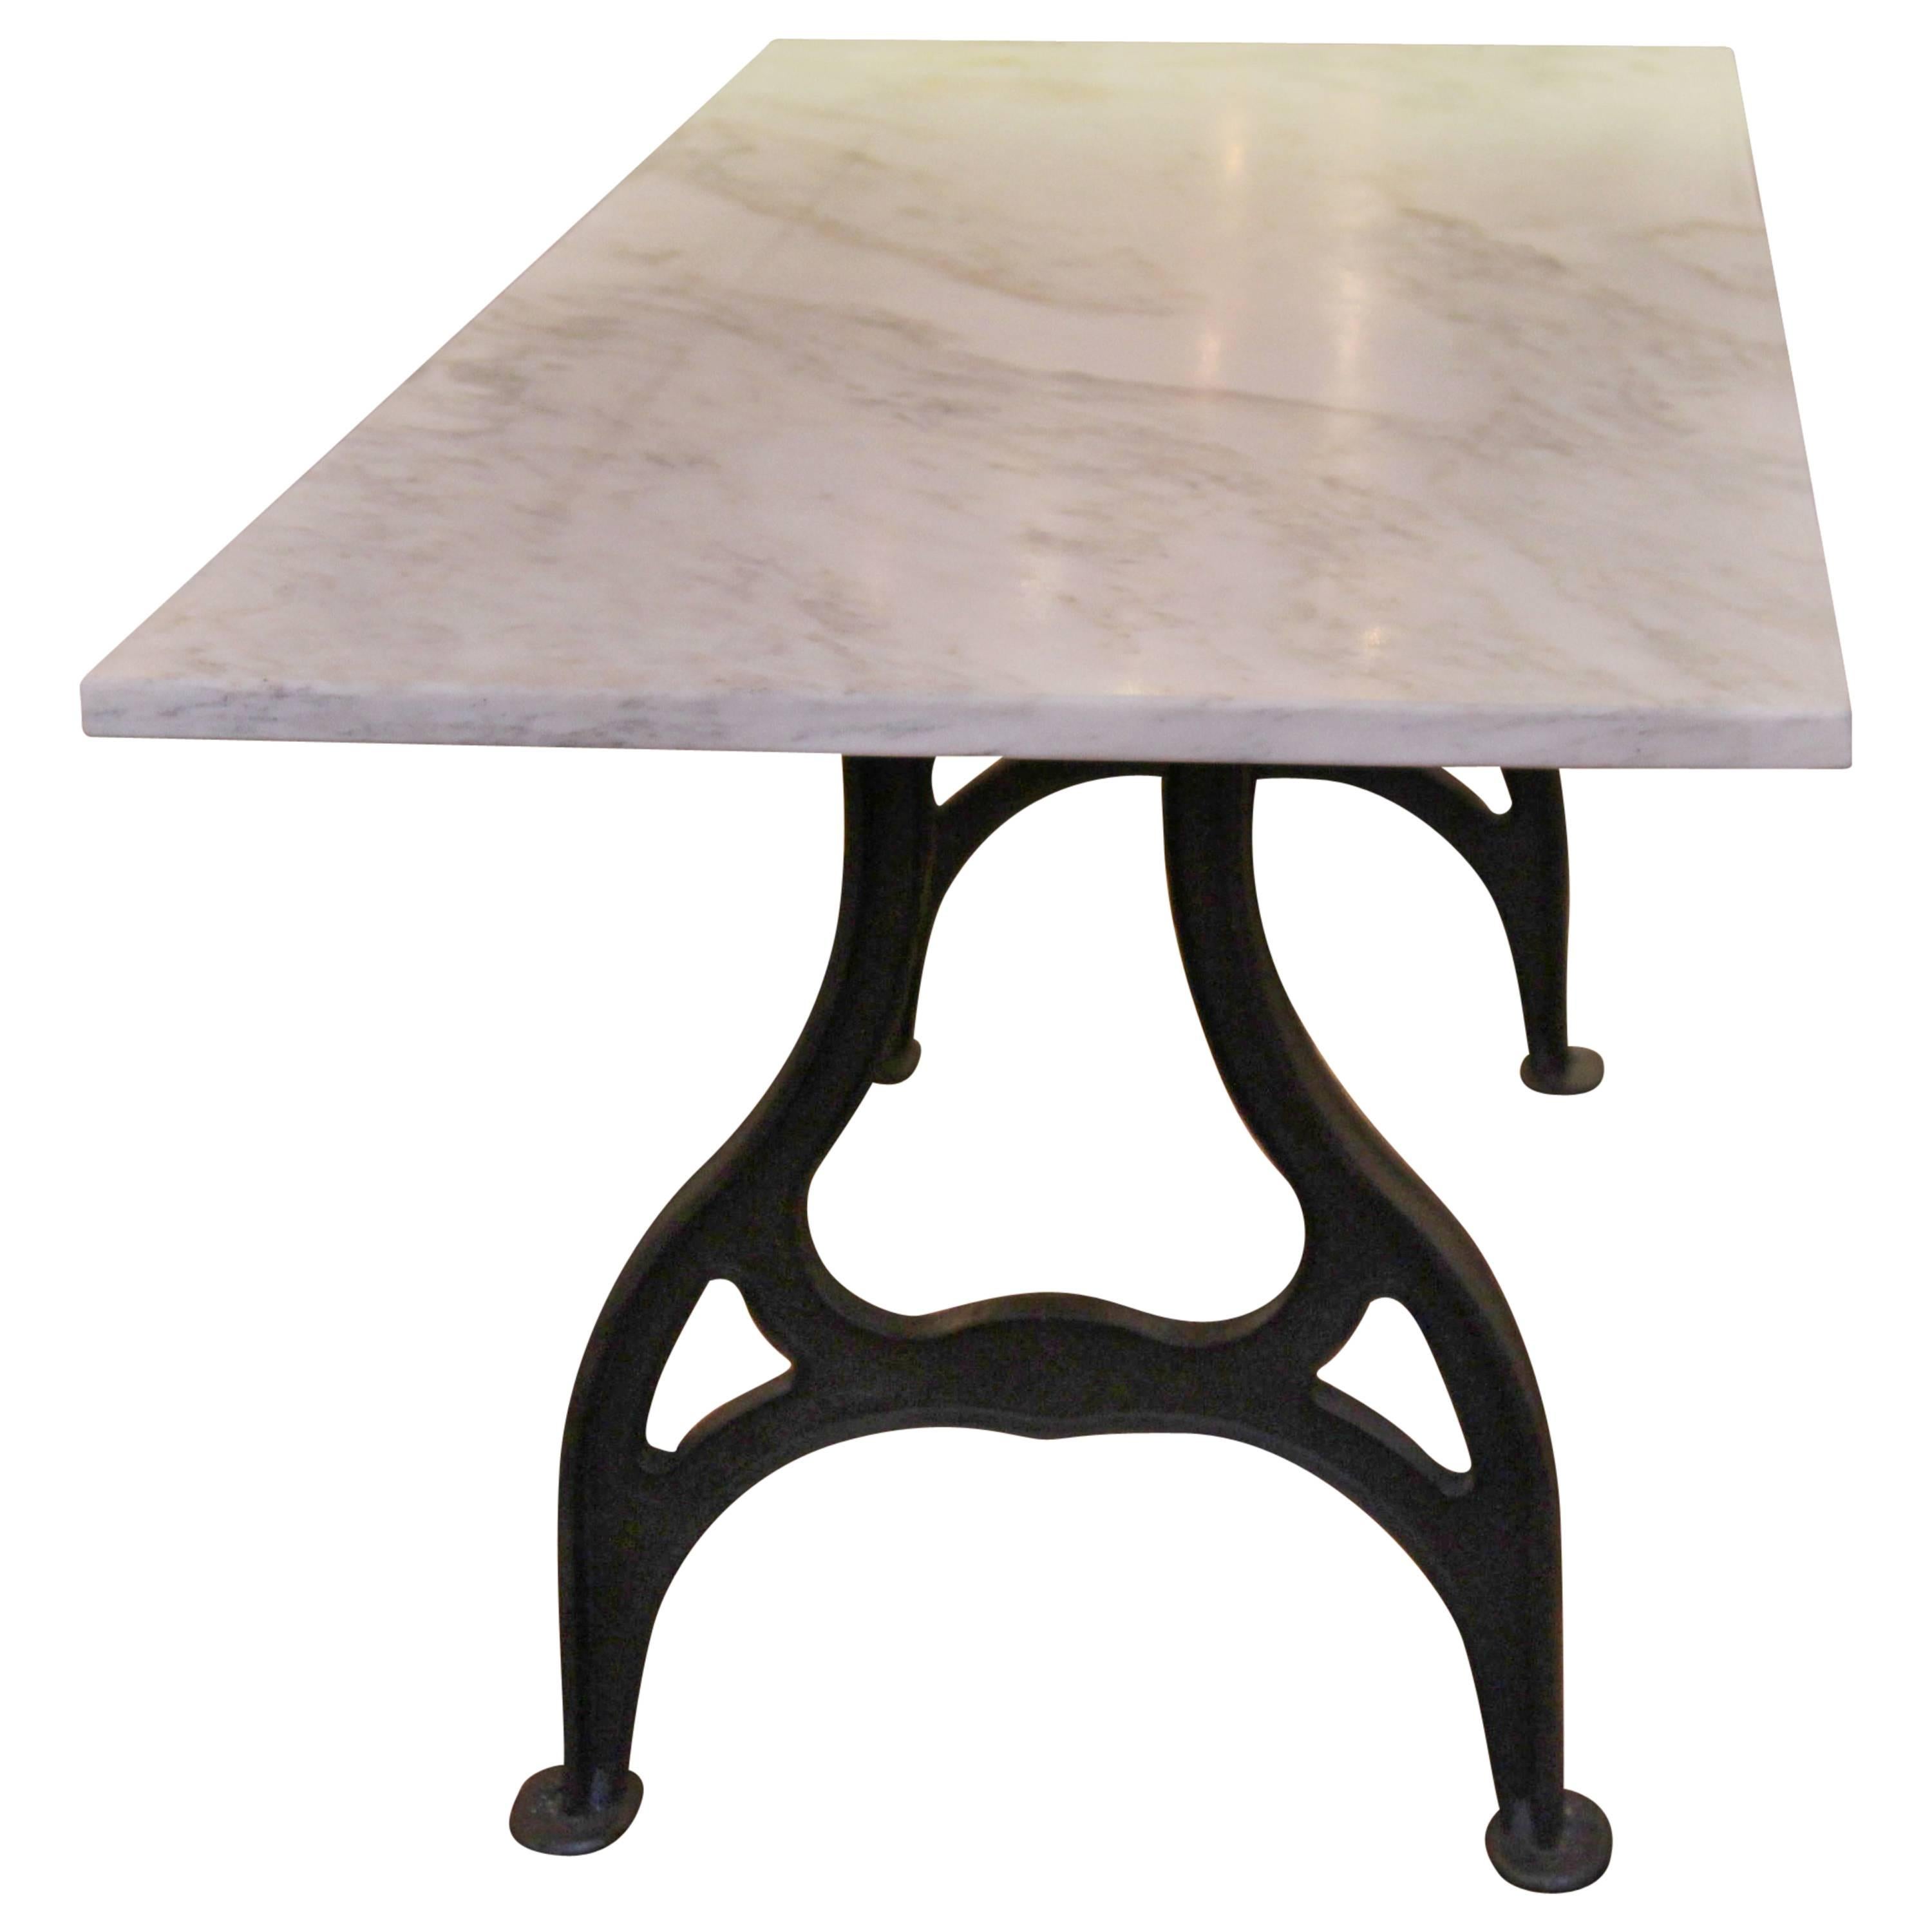 Reclaimed Marble Table with Cast Iron Industrial Legs